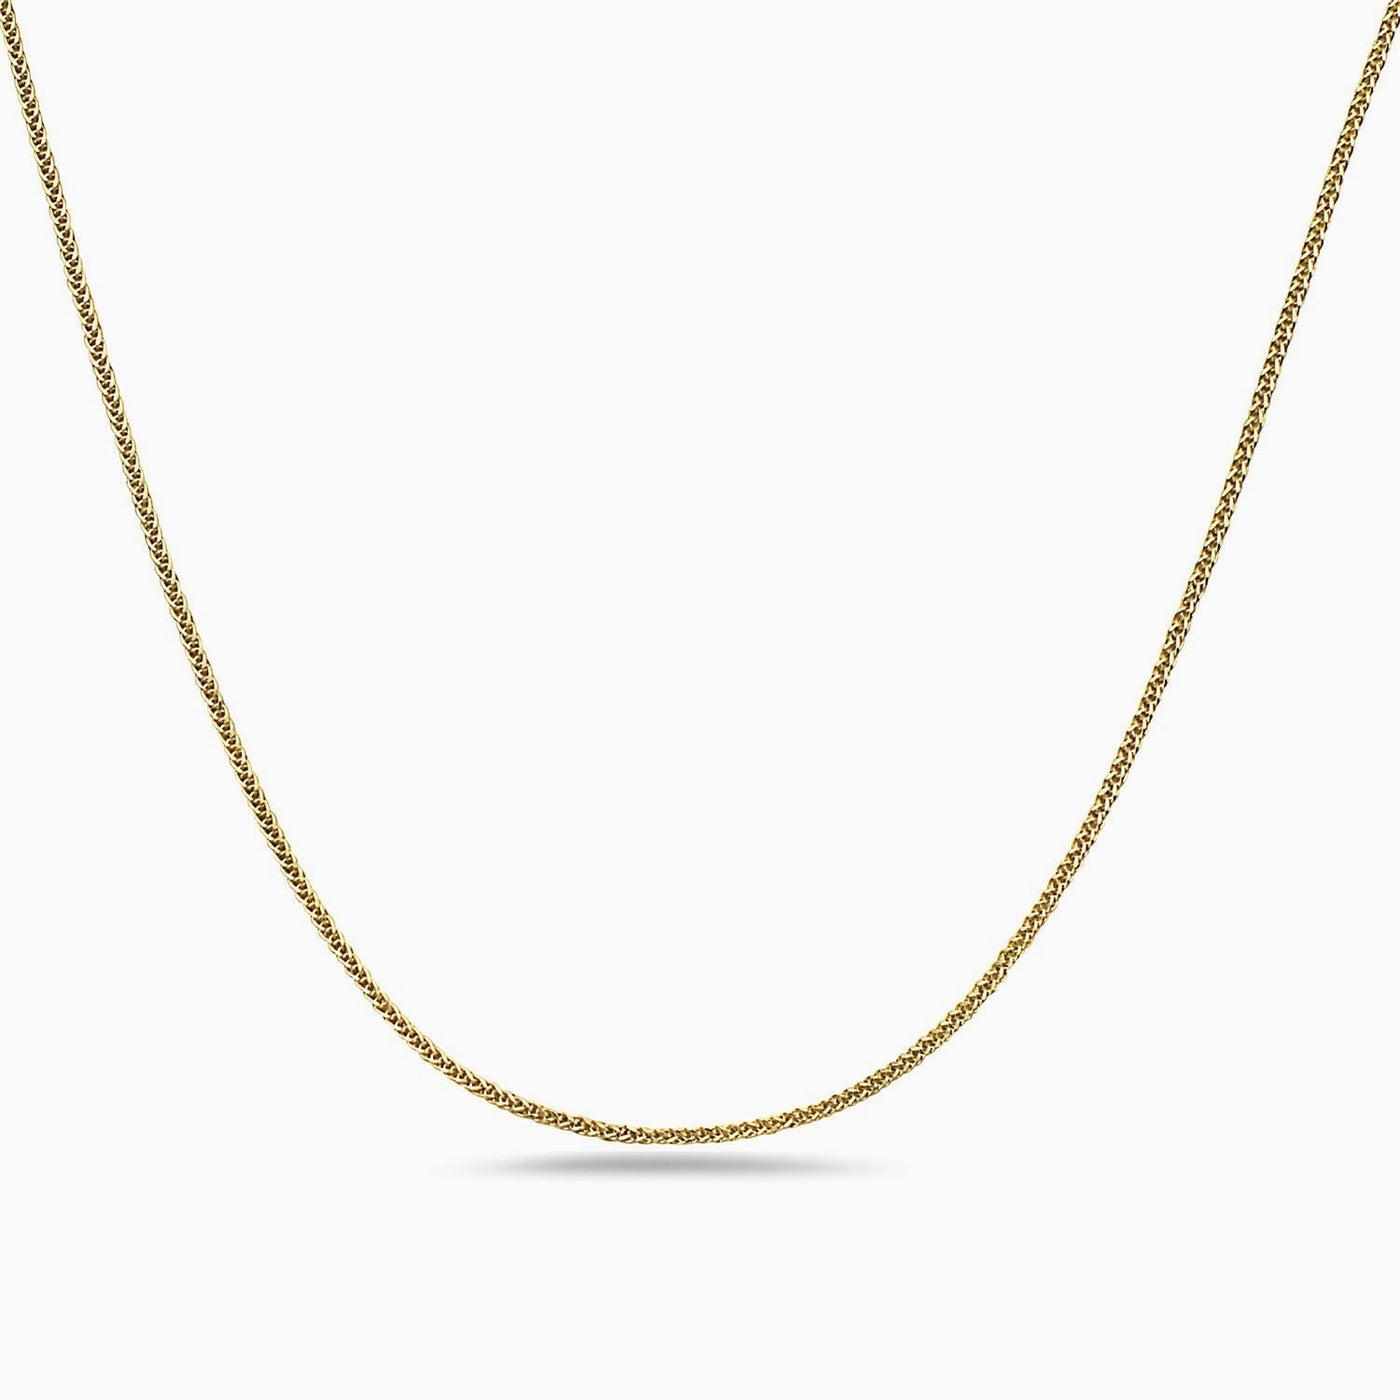 10K Gold Spiga Wheat Chain Necklace